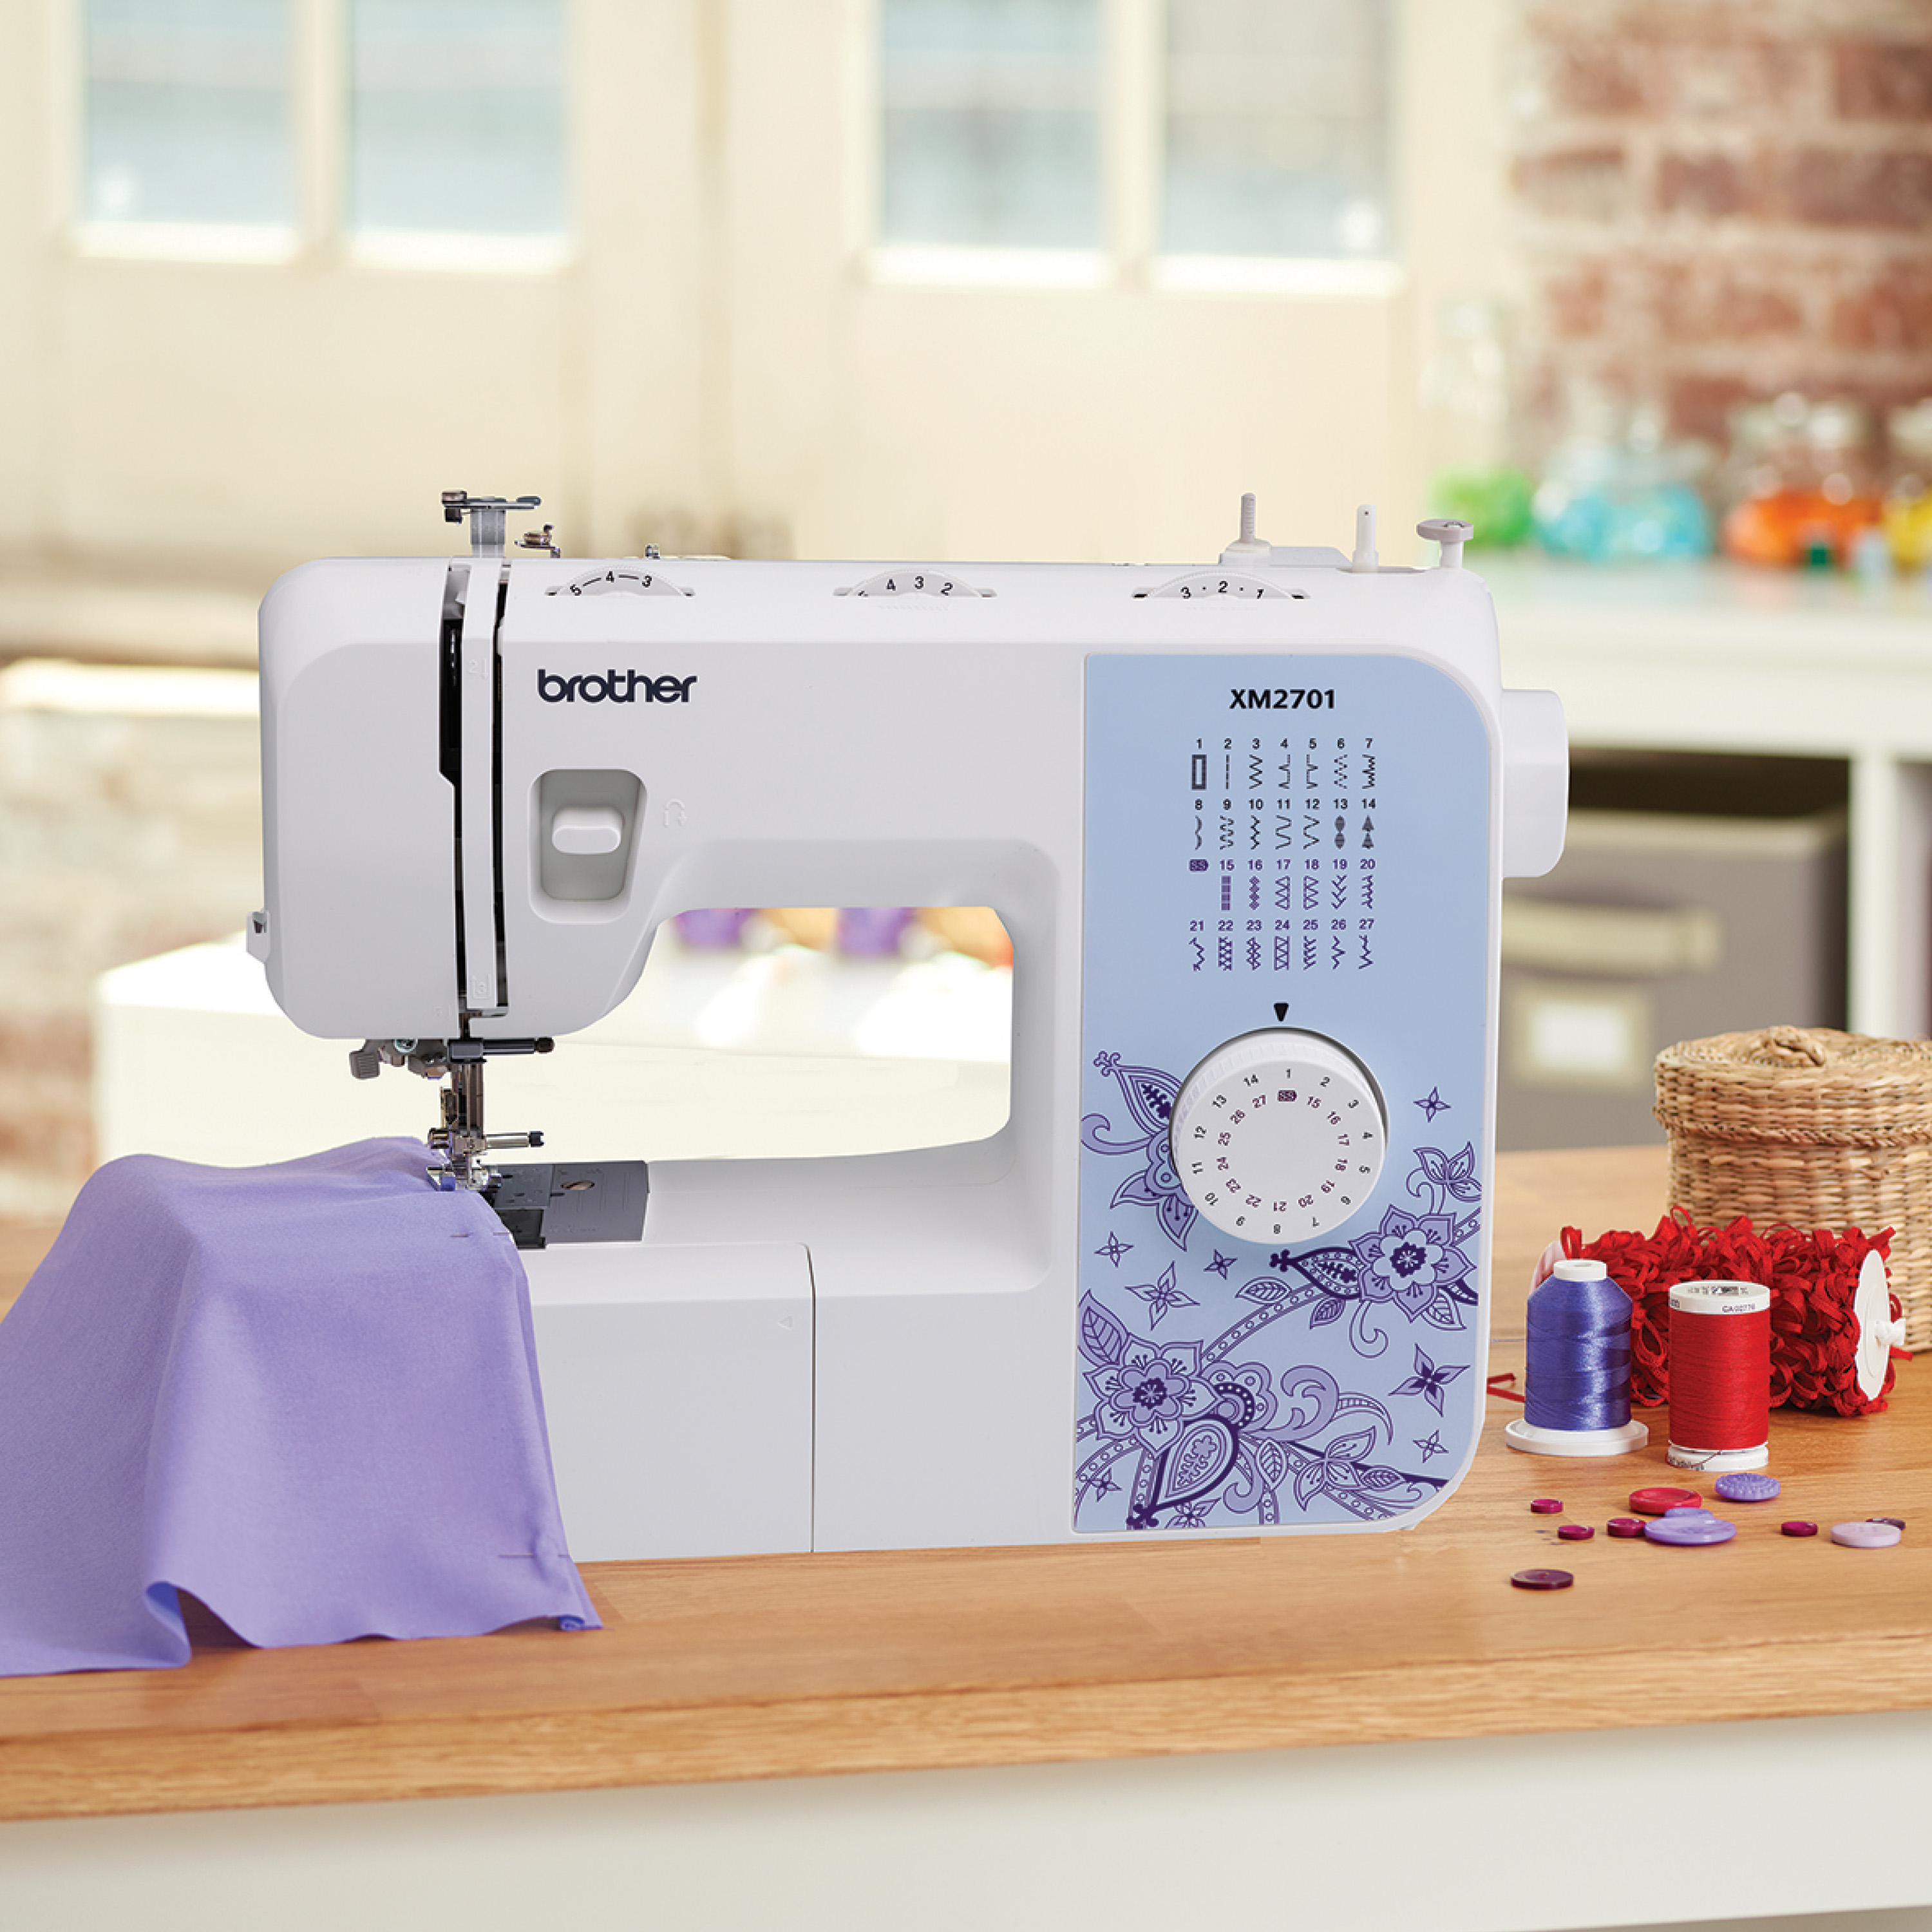 Brother XM2701 Portable, Mechanical, Full-Featured Sewing Machine with 27 Stitches - image 5 of 13